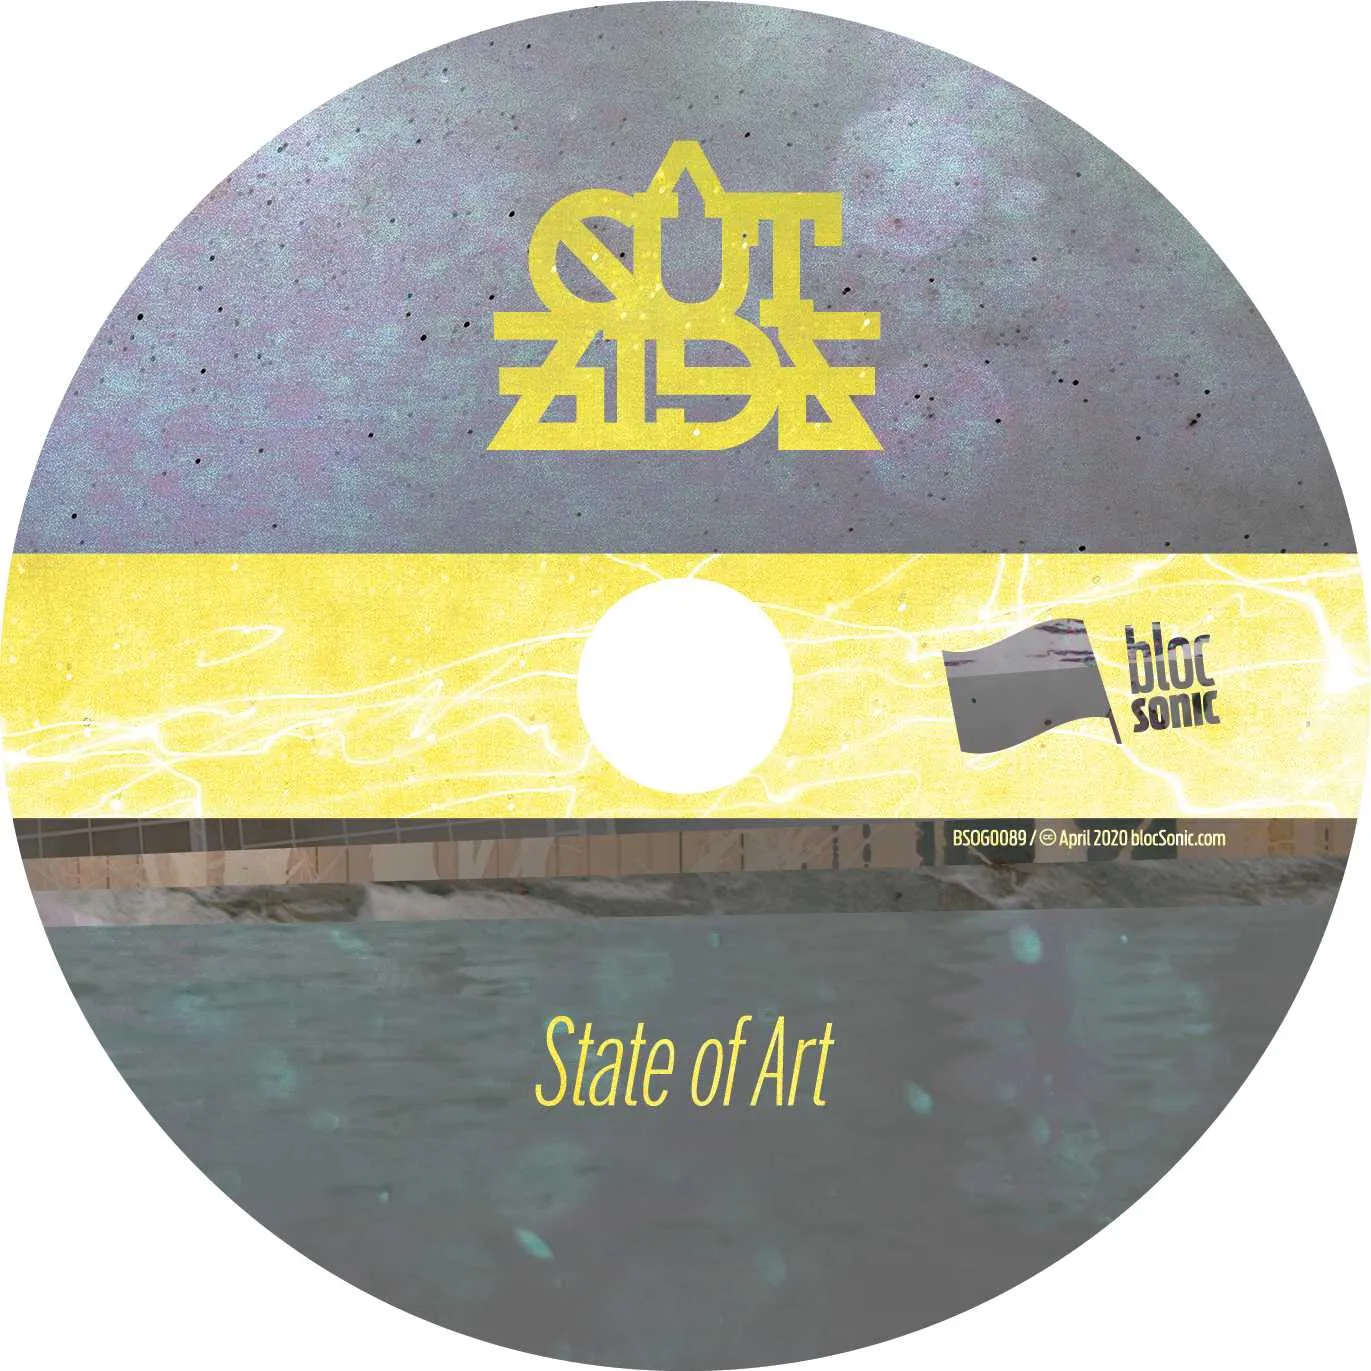 Album disc for “State of Art” by Cutside